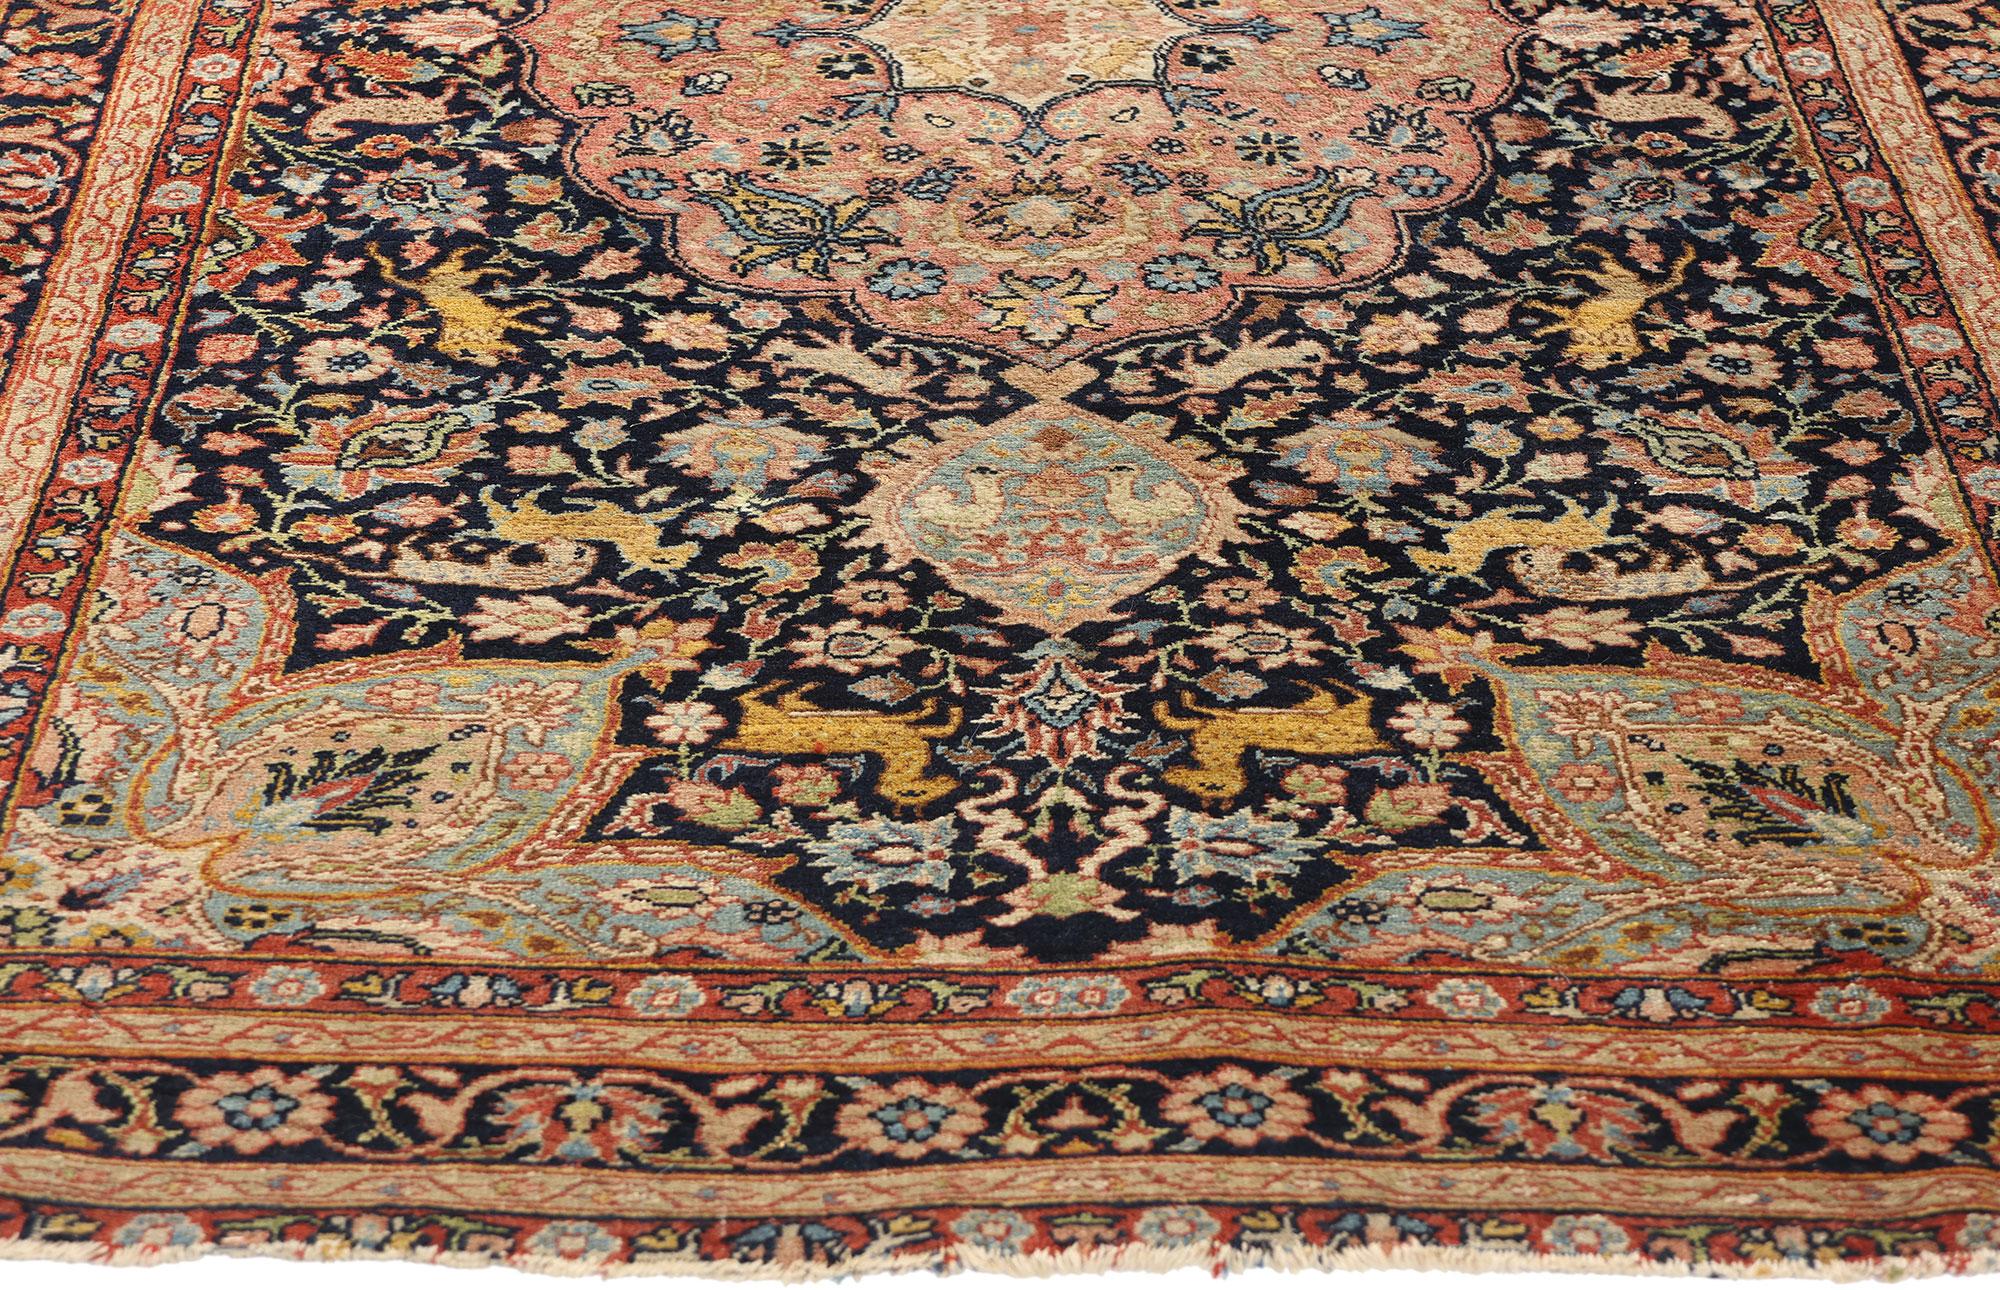 Safavid Medallion and Animal Persian Tabriz Hunting Carpet In Good Condition For Sale In Dallas, TX